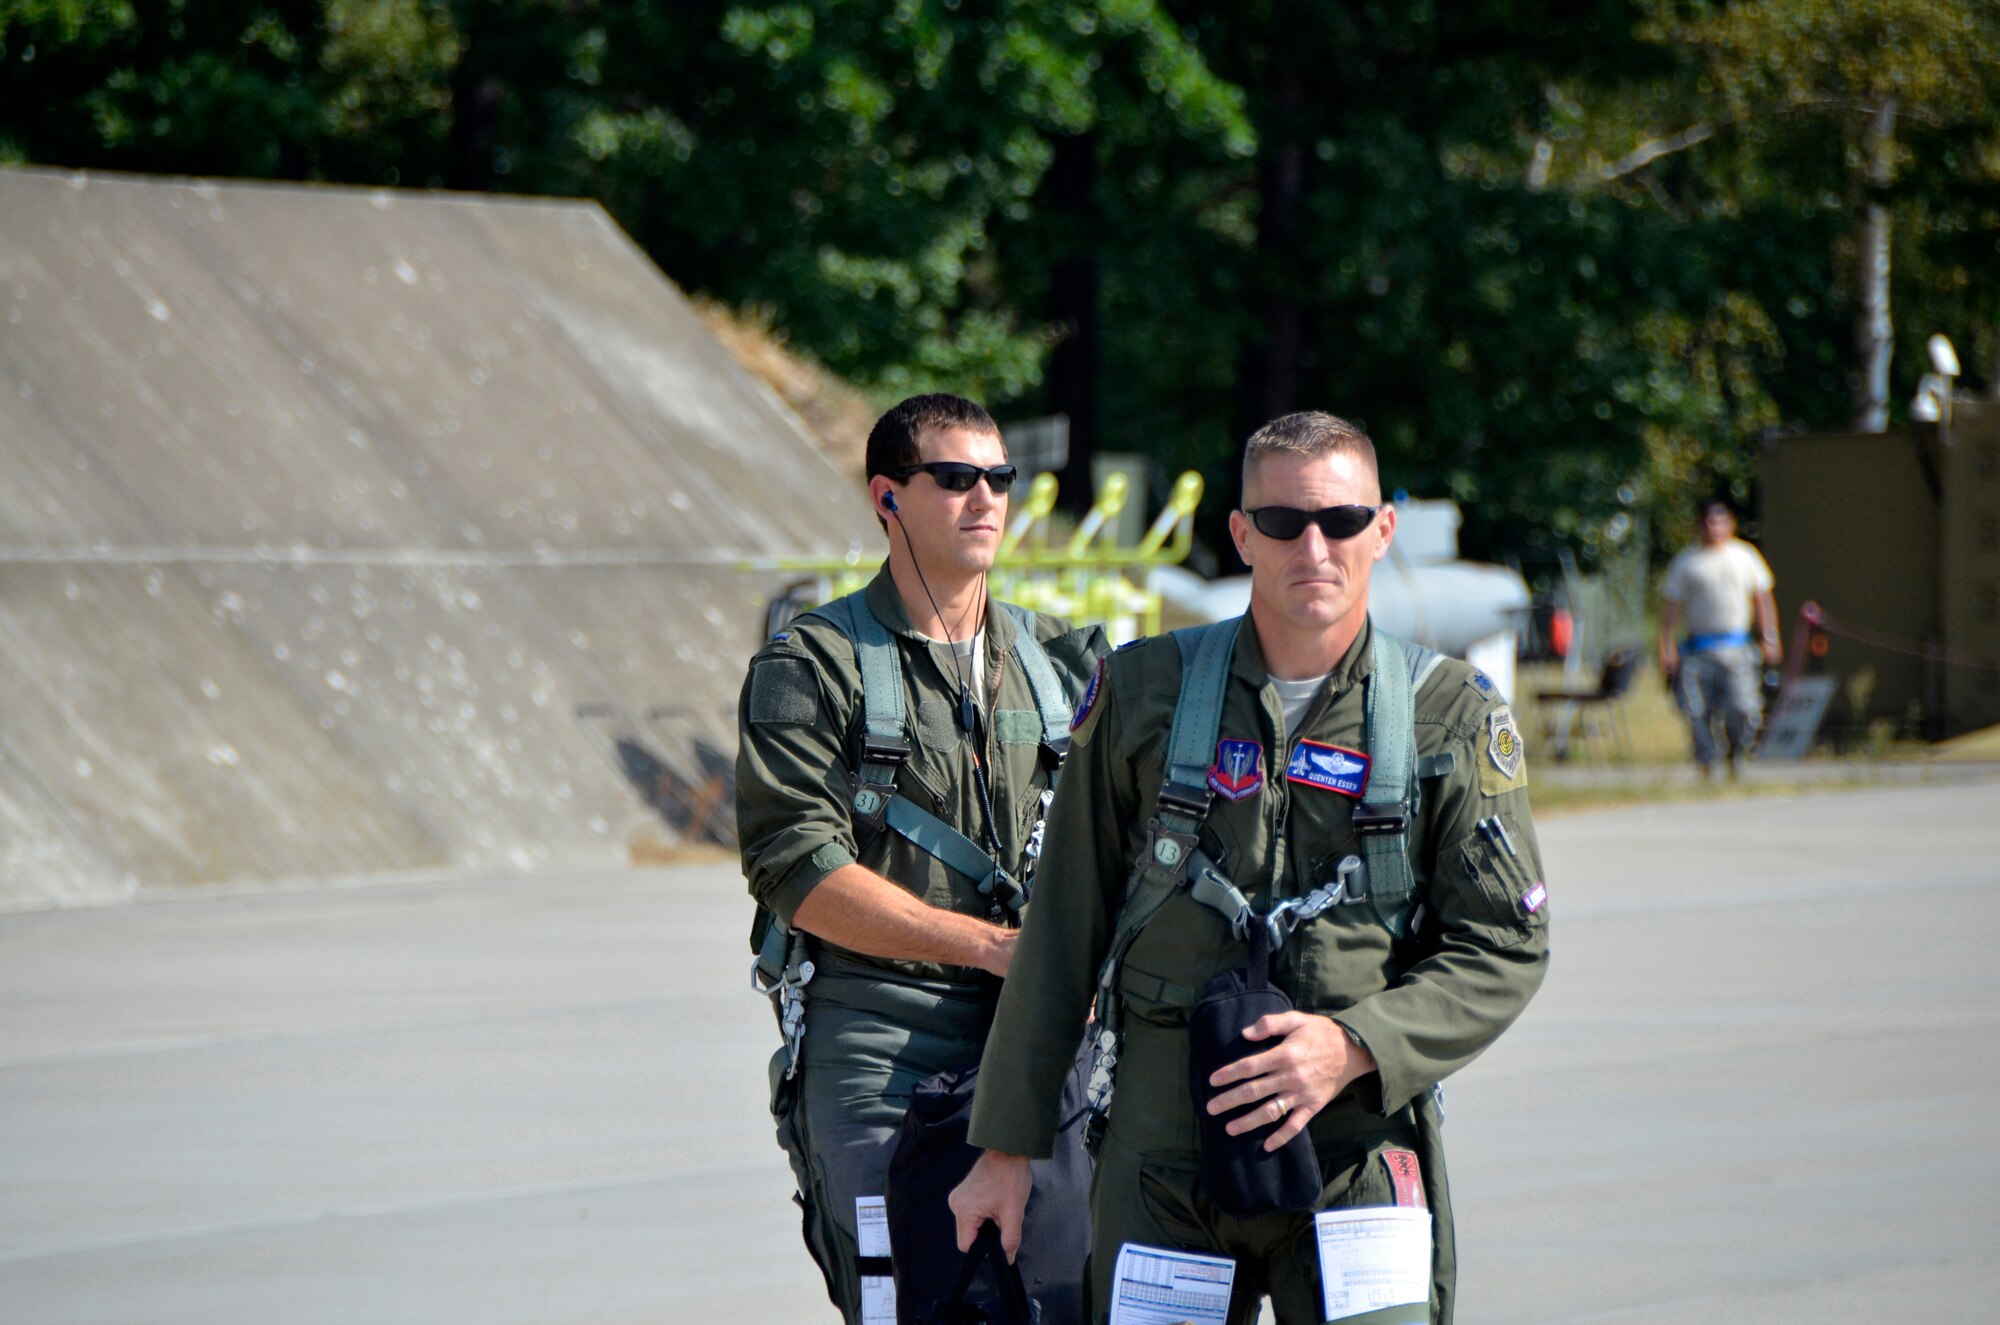 Lt. Col. Quenten Esser, 114th Operations Group commander, and 1st Lt. Brendan Zubrod, F-16 wingman and assistant chief of weapons and tactics, step to their jets prior to a training mission at Lask Air Base, Poland, Sept. 12, 2016. The 114th Fighter Wing deployed more than 100 personnel in support of Aviation Detachment 16-4, a bilateral training exercise between the U.S. and Polish forces. The 114 FW was able to train alongside Polish allies in a variety of missions to include, close air support, air to air and air to ground. (U.S. Air National Guard photo by Capt. Amy Rittberger)